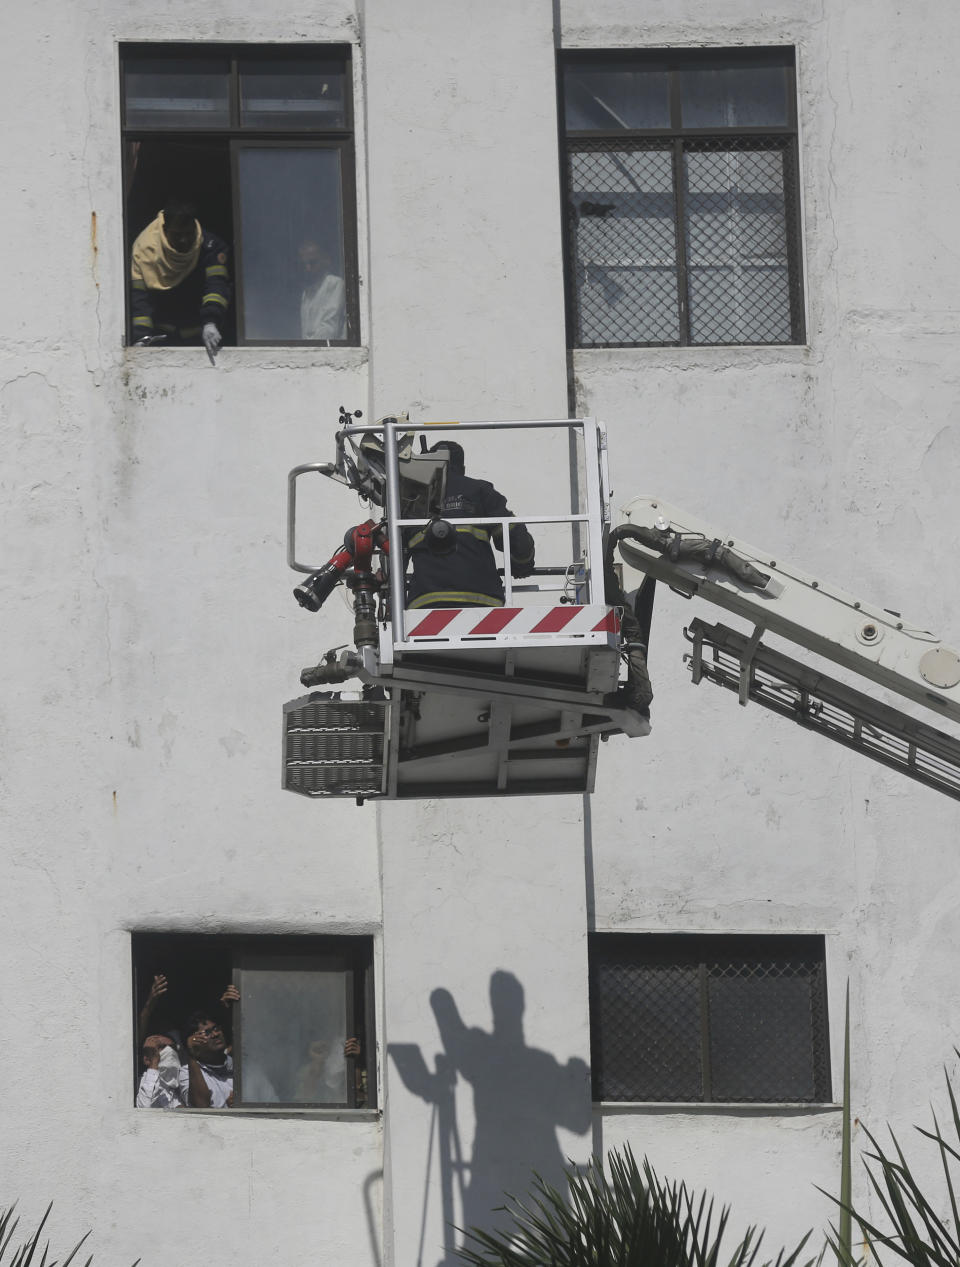 People awaiting rescue stand near the windows of a nine-story building with offices of a state-run telephone company during a fire in Mumbai, India, Monday, July 22, 2019. (AP Photo/Rafiq Maqbool)